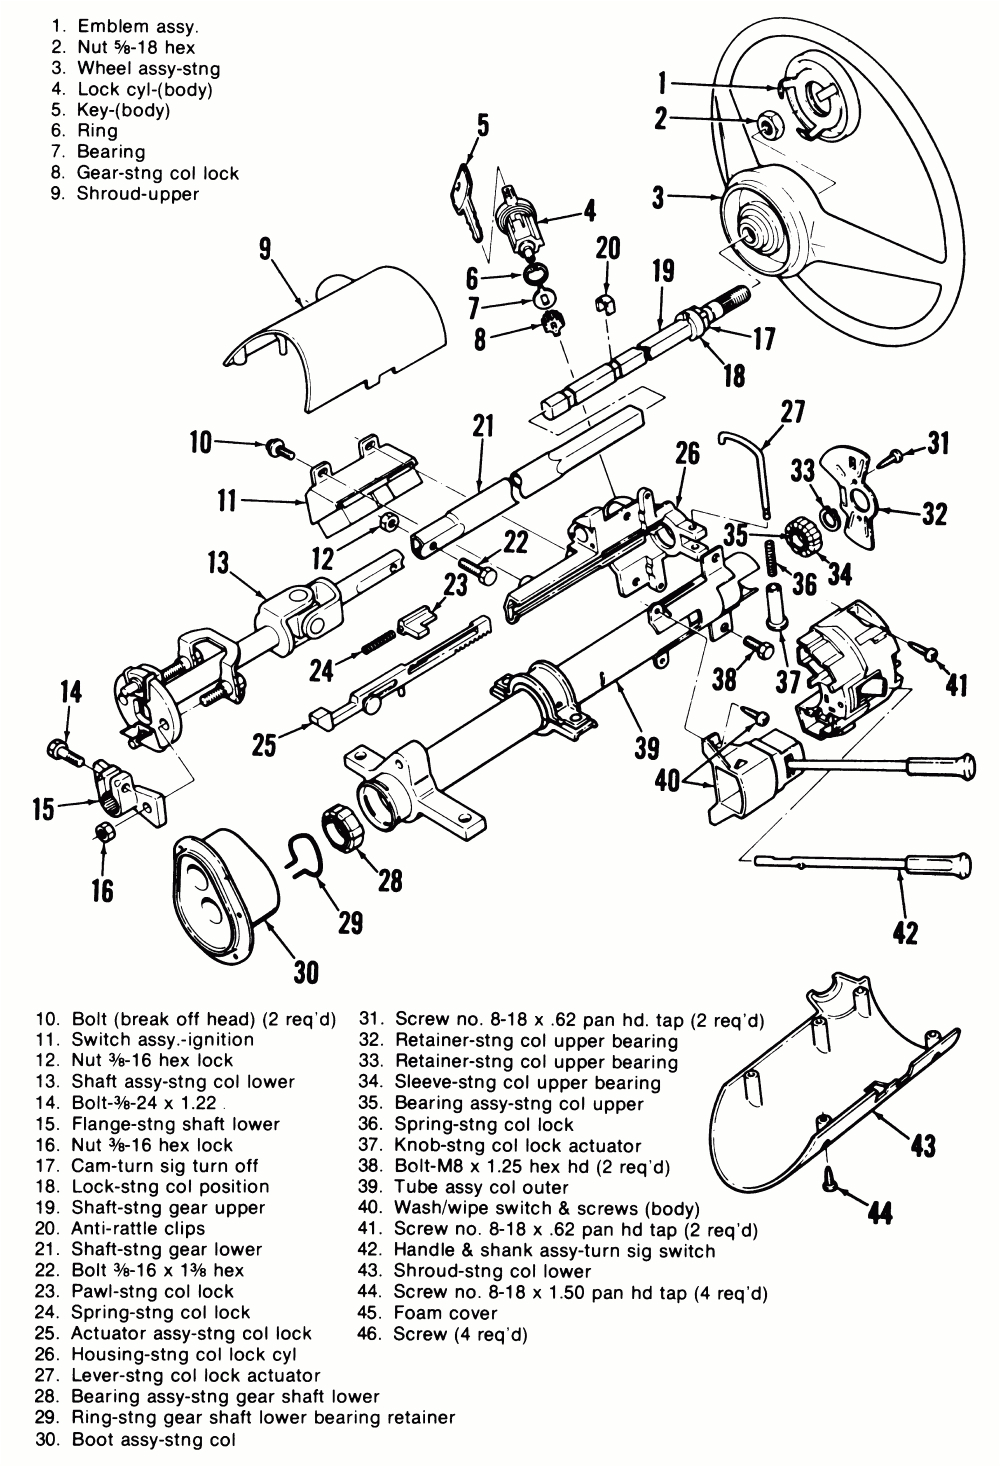 1985 chevy truck steering column diagram wiring diagram for 1989 ford f 250 steering column free download gif